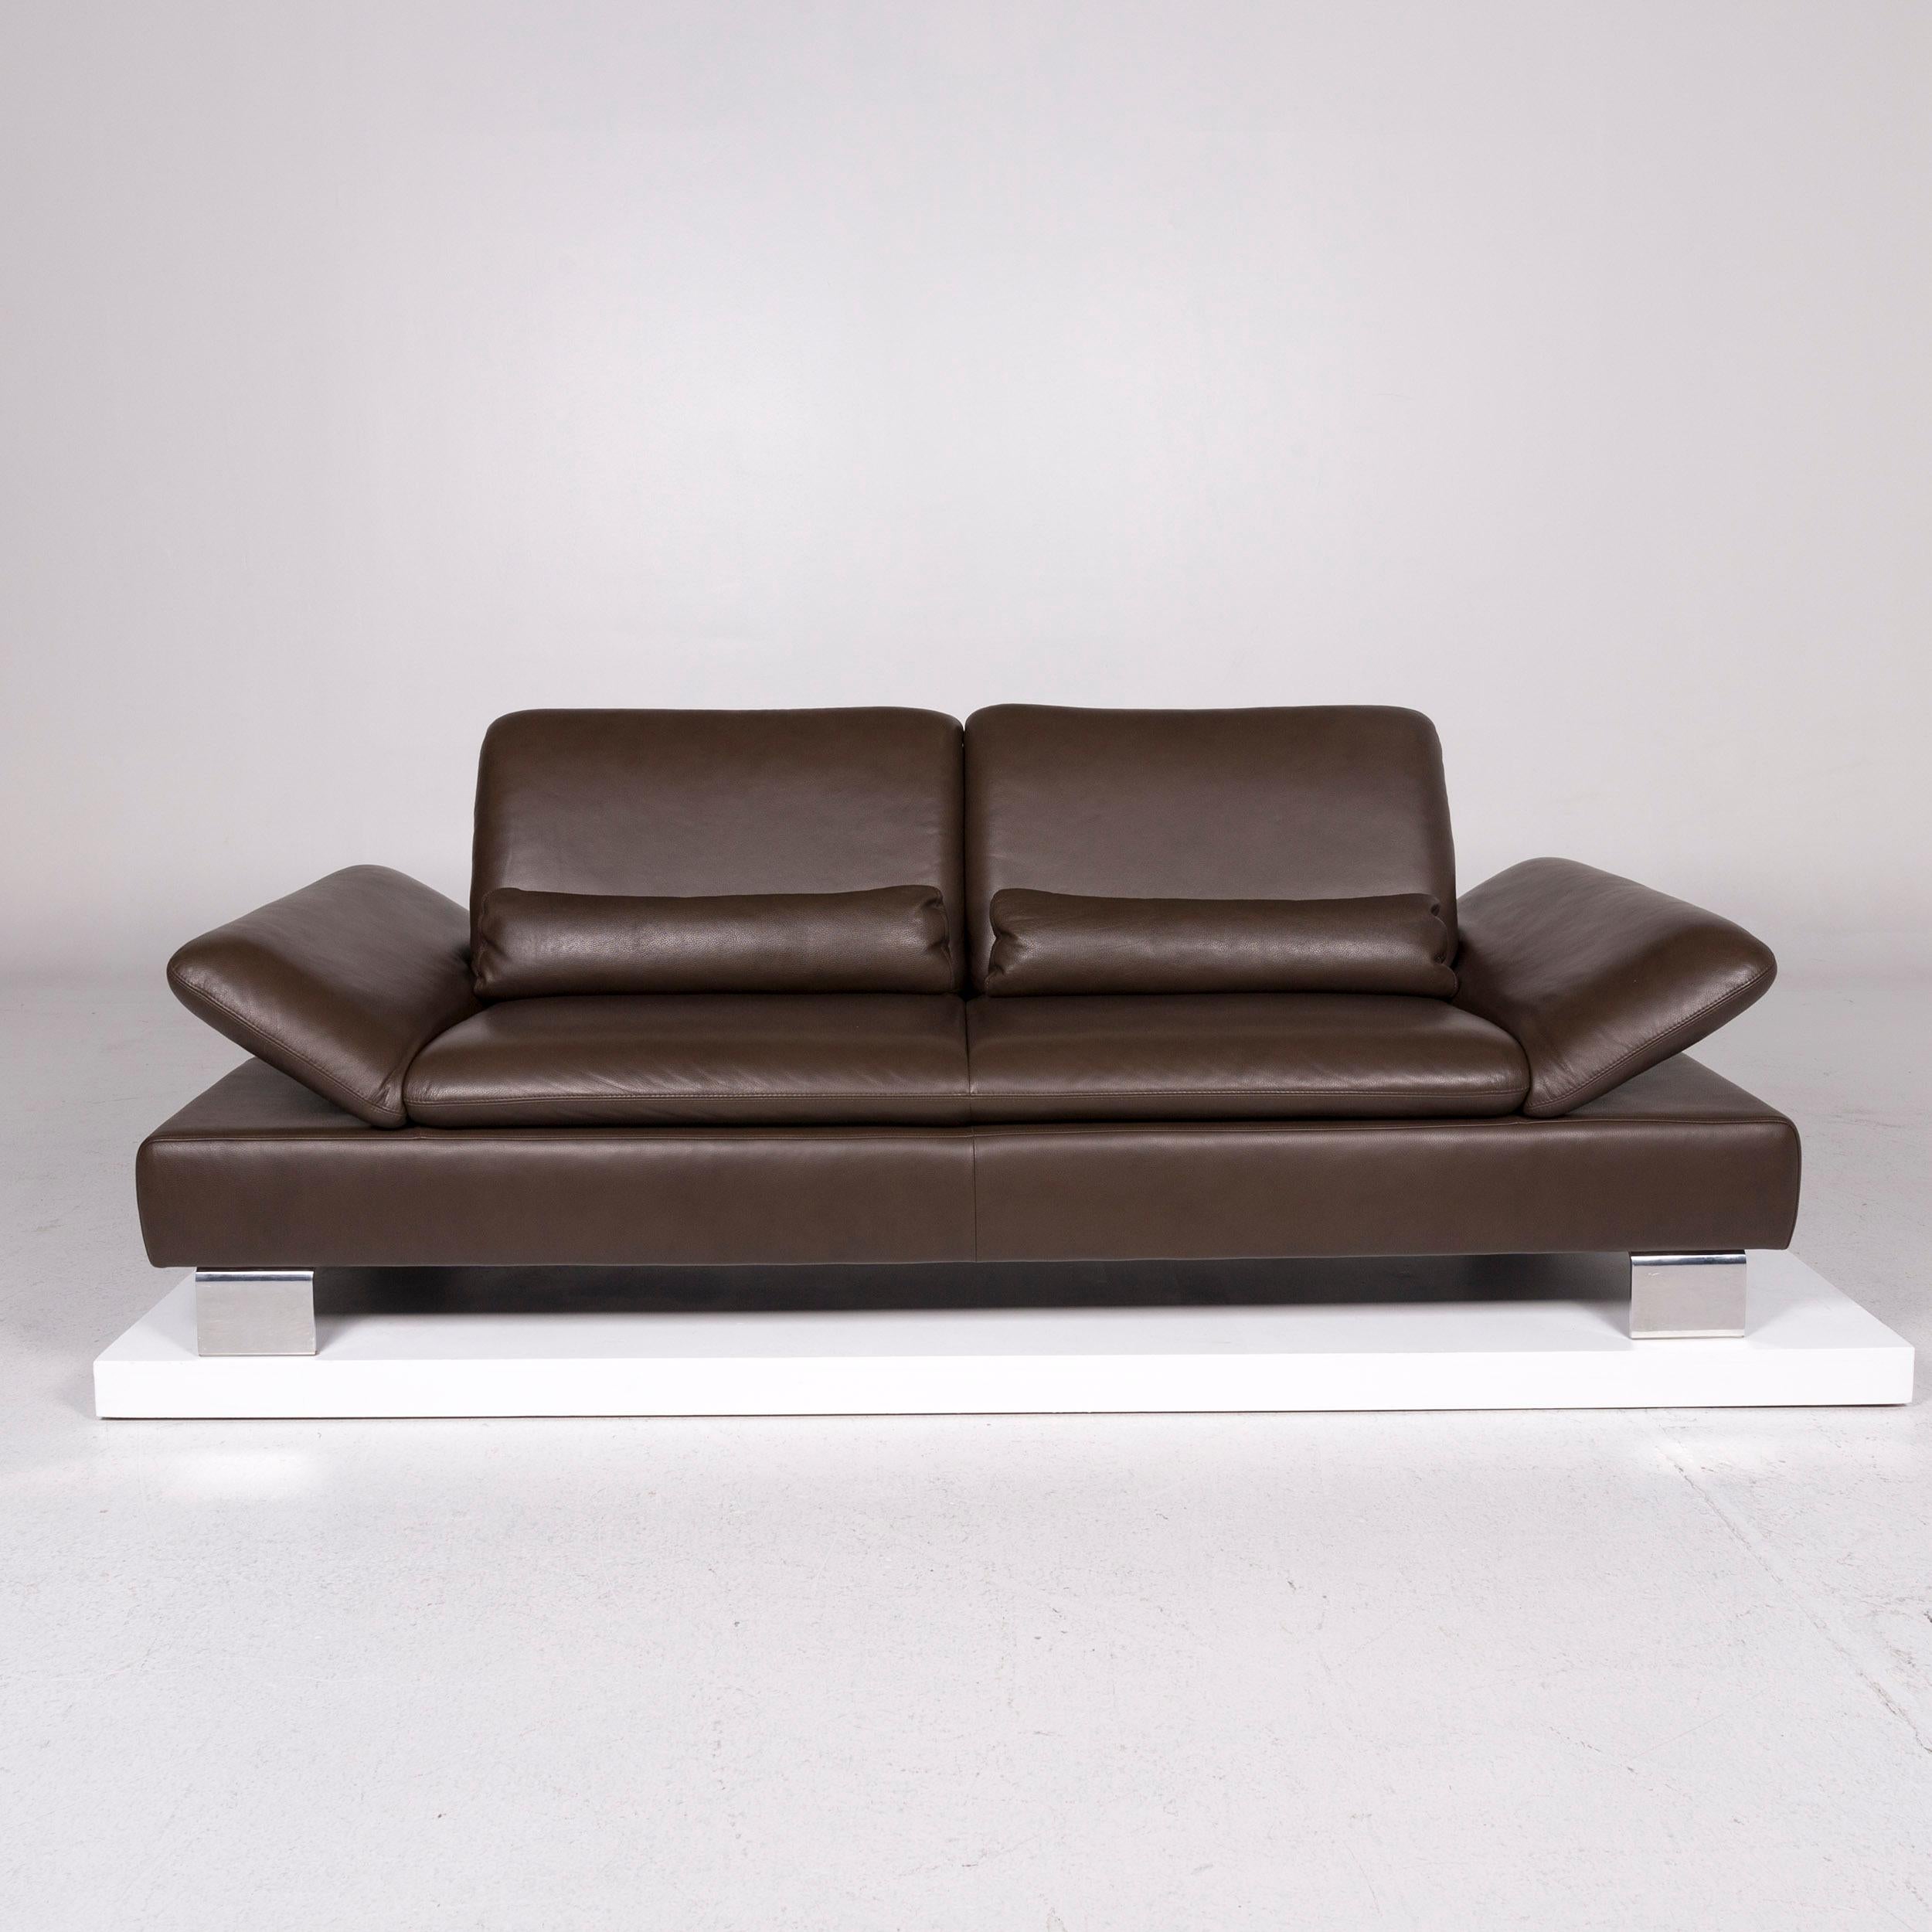 We bring to you a Willi Schillig leather sofa brown dark brown three-seat function couch.


 Product measurements in centimeters:
 

Depth 95
Width 229
Height 85
Seat-height 44
Rest-height 44
Seat-depth 42
Seat-width 155
Back-height